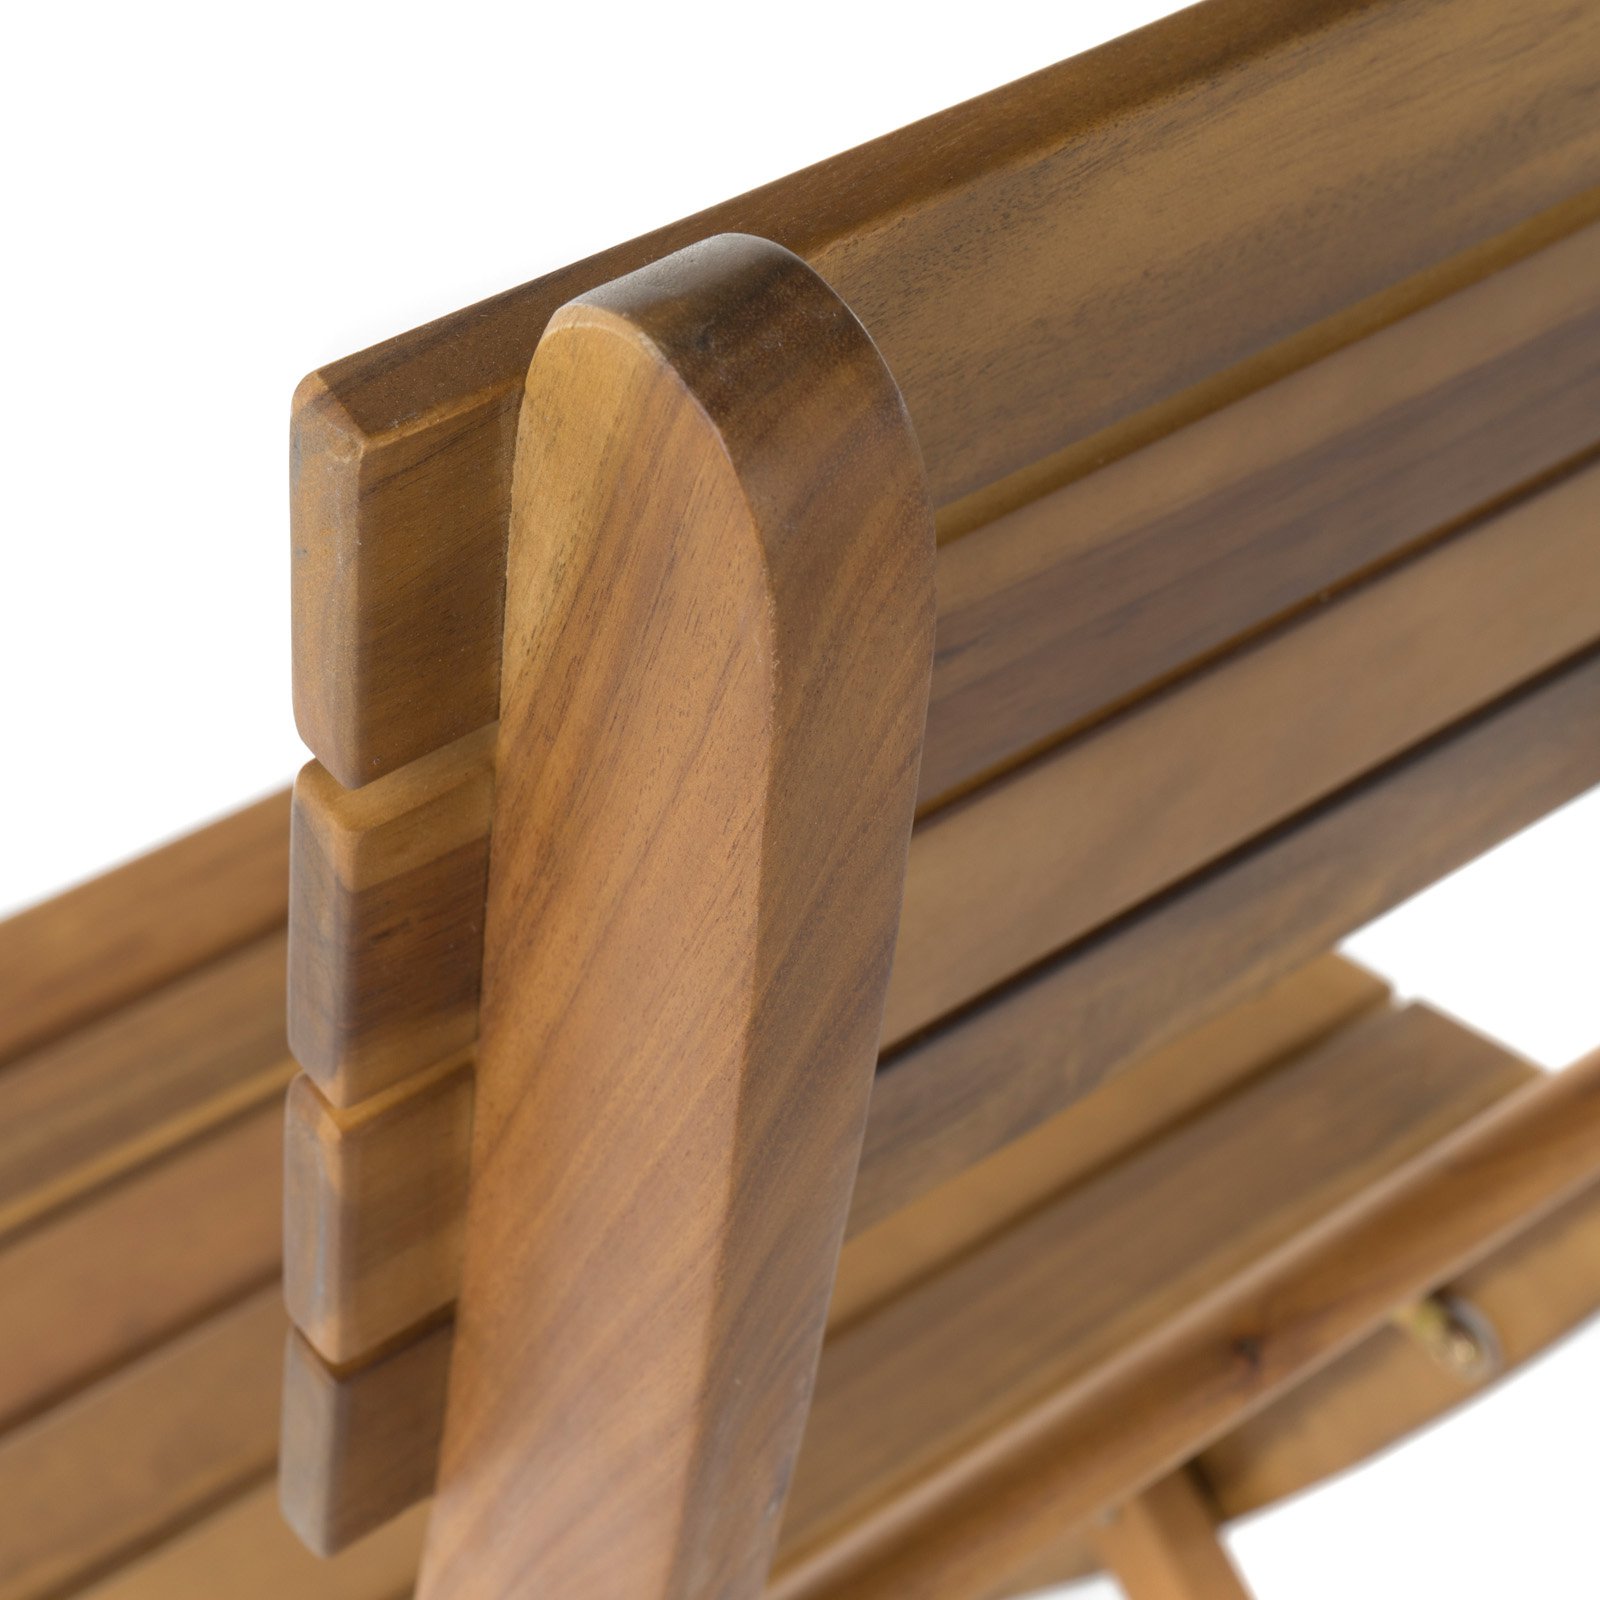 Pablo Acacia Wood Foldable Patio Dining Chairs - image 4 of 11